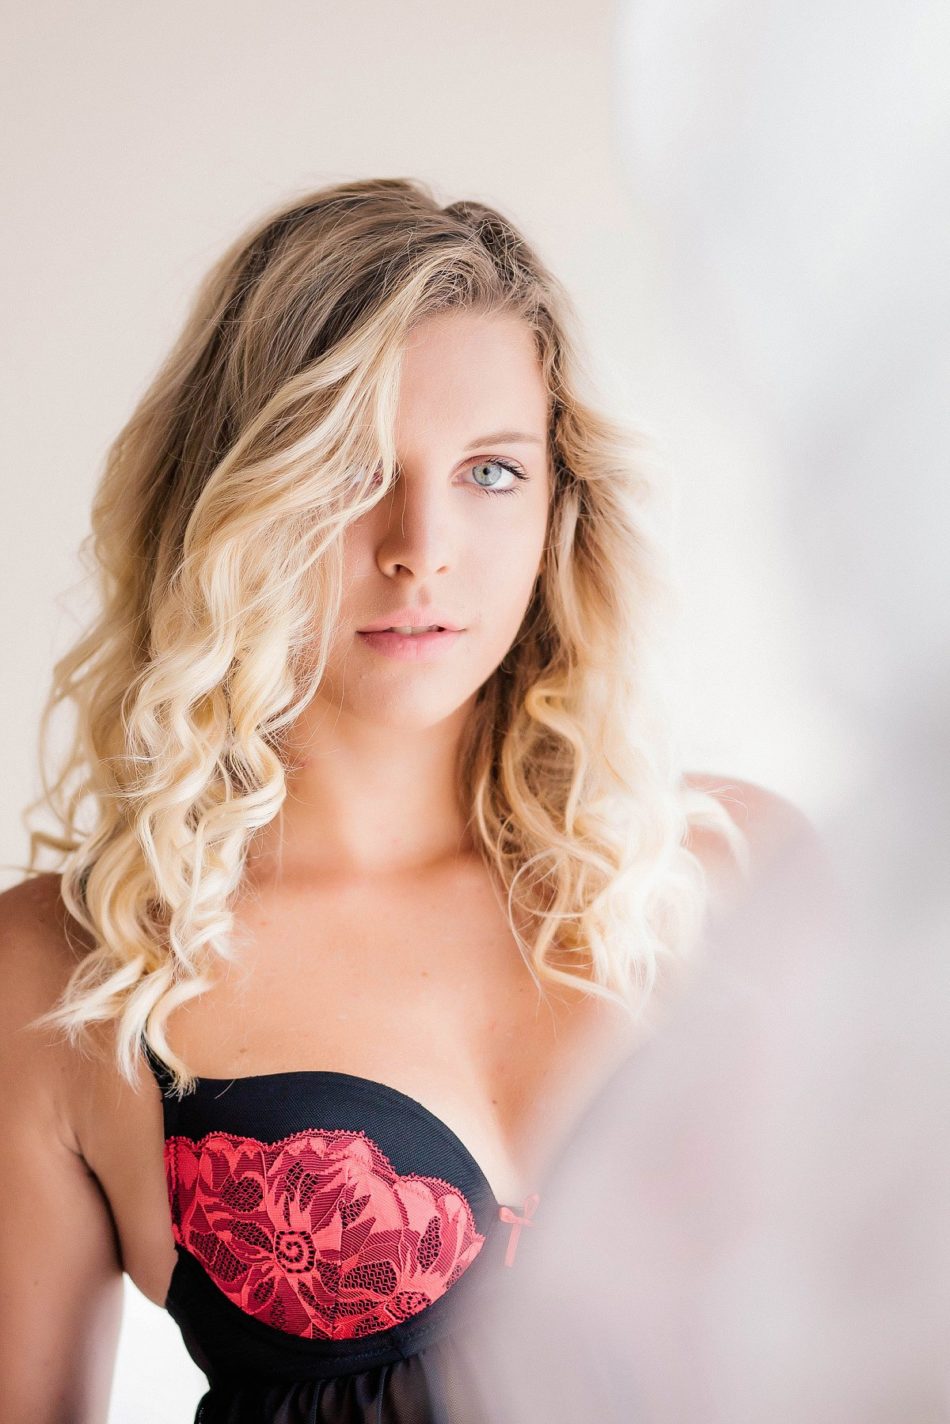 Audrey wears a red and black lingerie by window. Photography by Charleston Boudoir Photographer, Kate Timbers. Kate Timbers Photography. http://katetimbers.com #katetimbersphotography // Charleston Photography // Inspiration